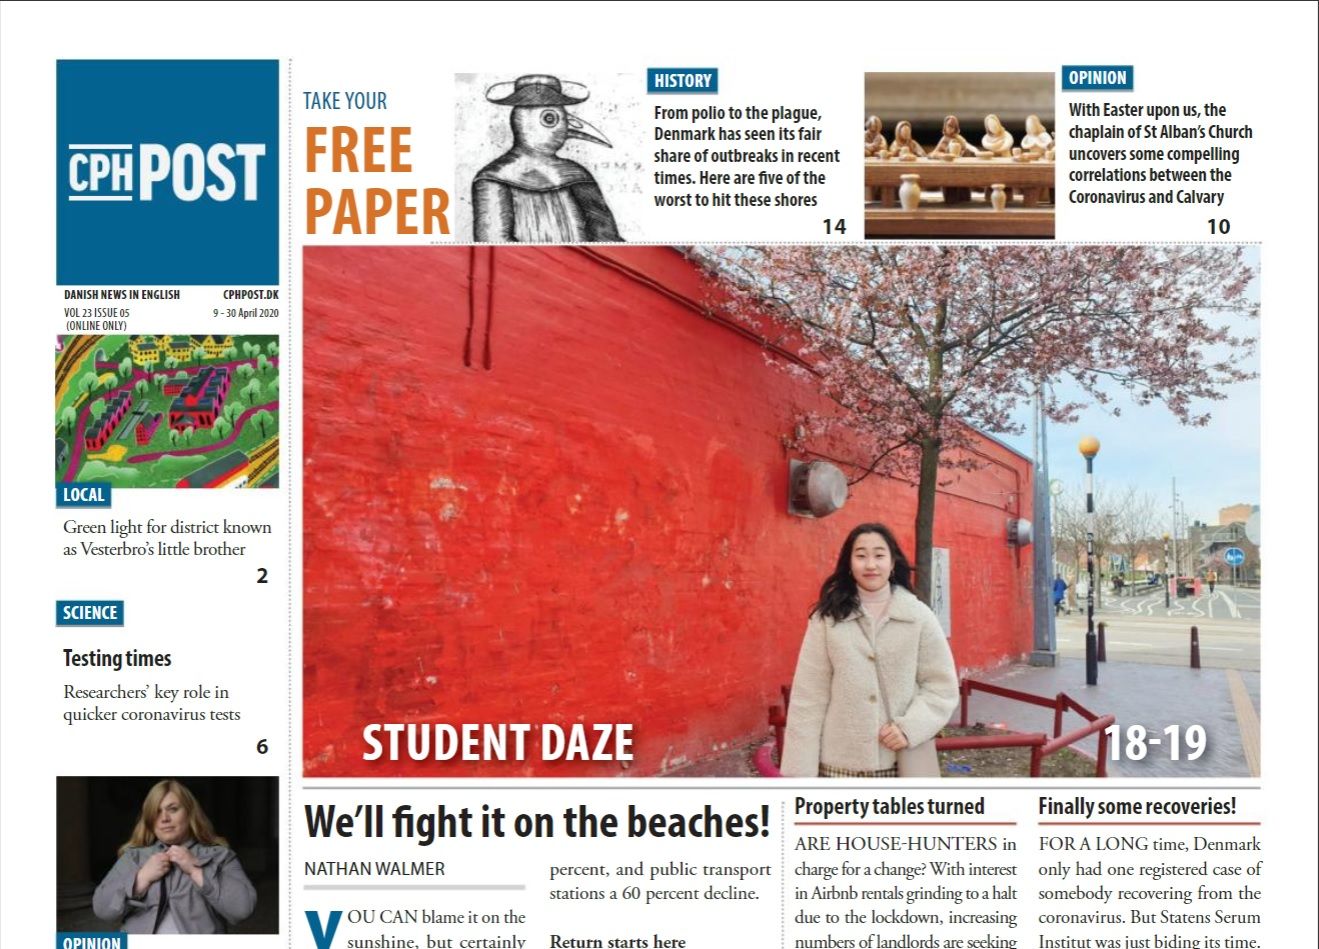 Copenhagen Post online edition out NOW (and Happy Easter!)